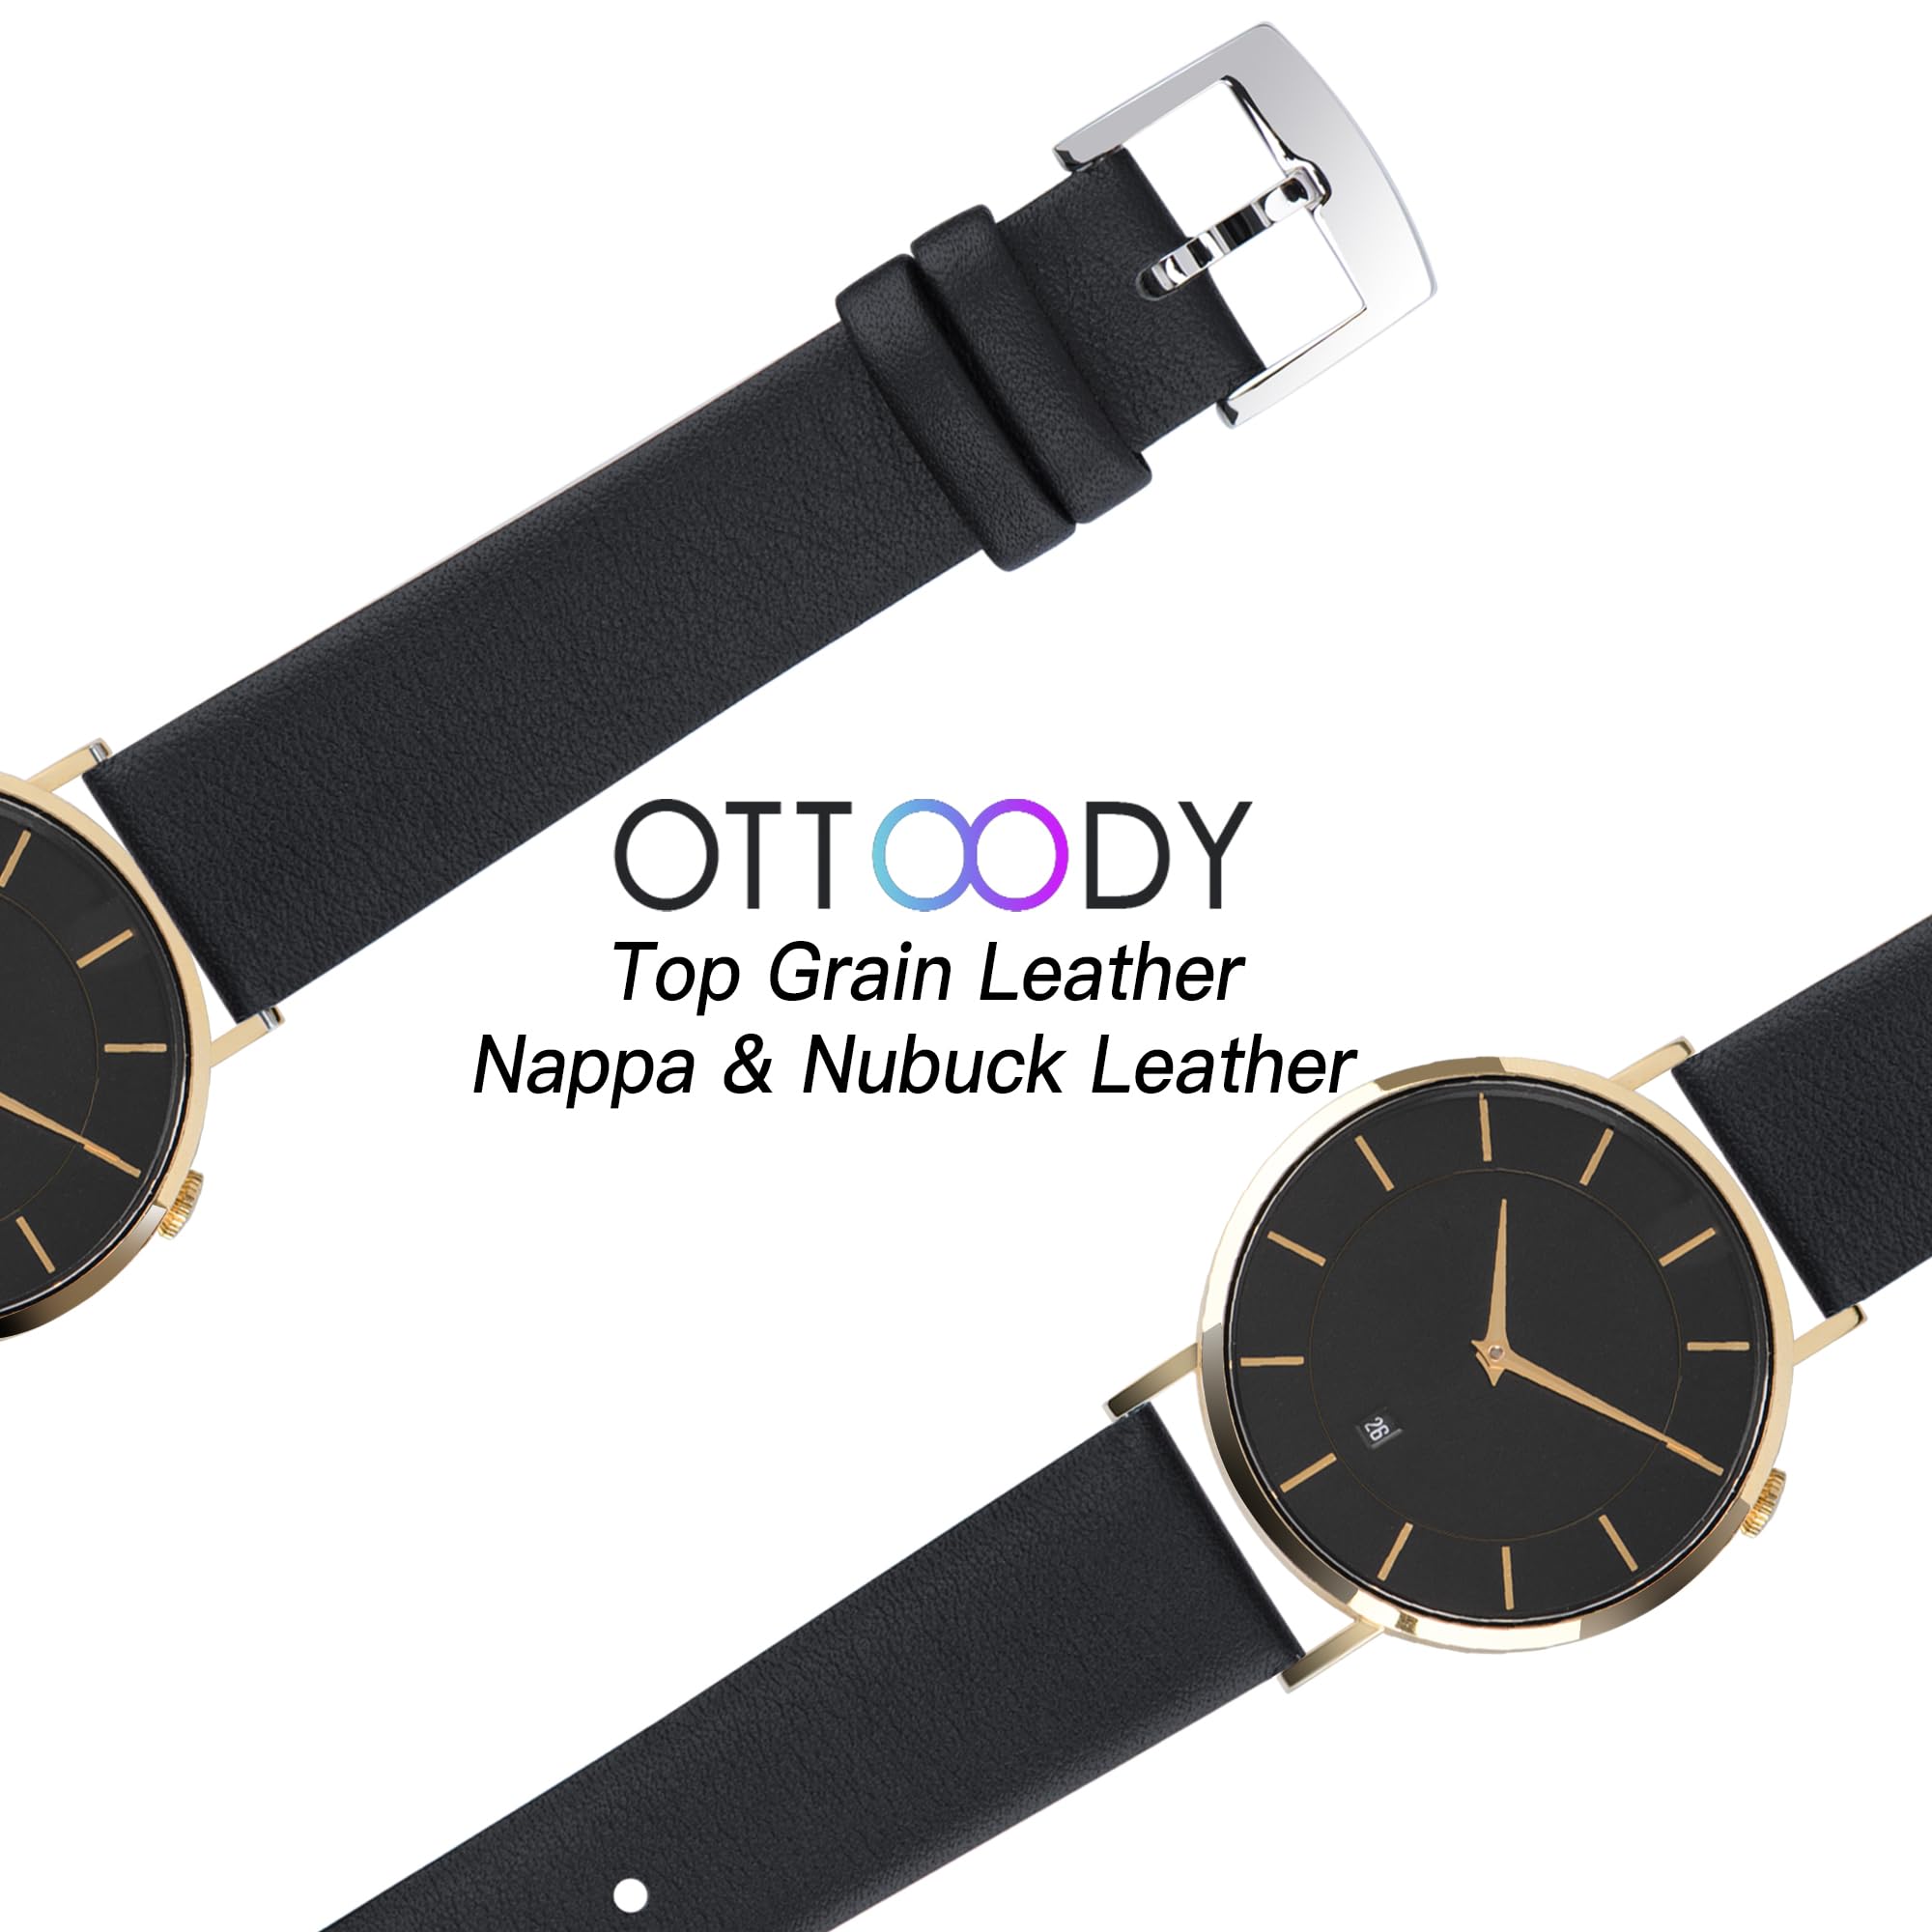 OTTOODY Leather Watch Bands Quick Release Watch Straps, Elegant & Ultra-soft Top Grain Leather Watch Band for Women Men, Choice of Color & Width - 12mm 14mm 16mm 18mm 20mm for Watch & Smartwatch